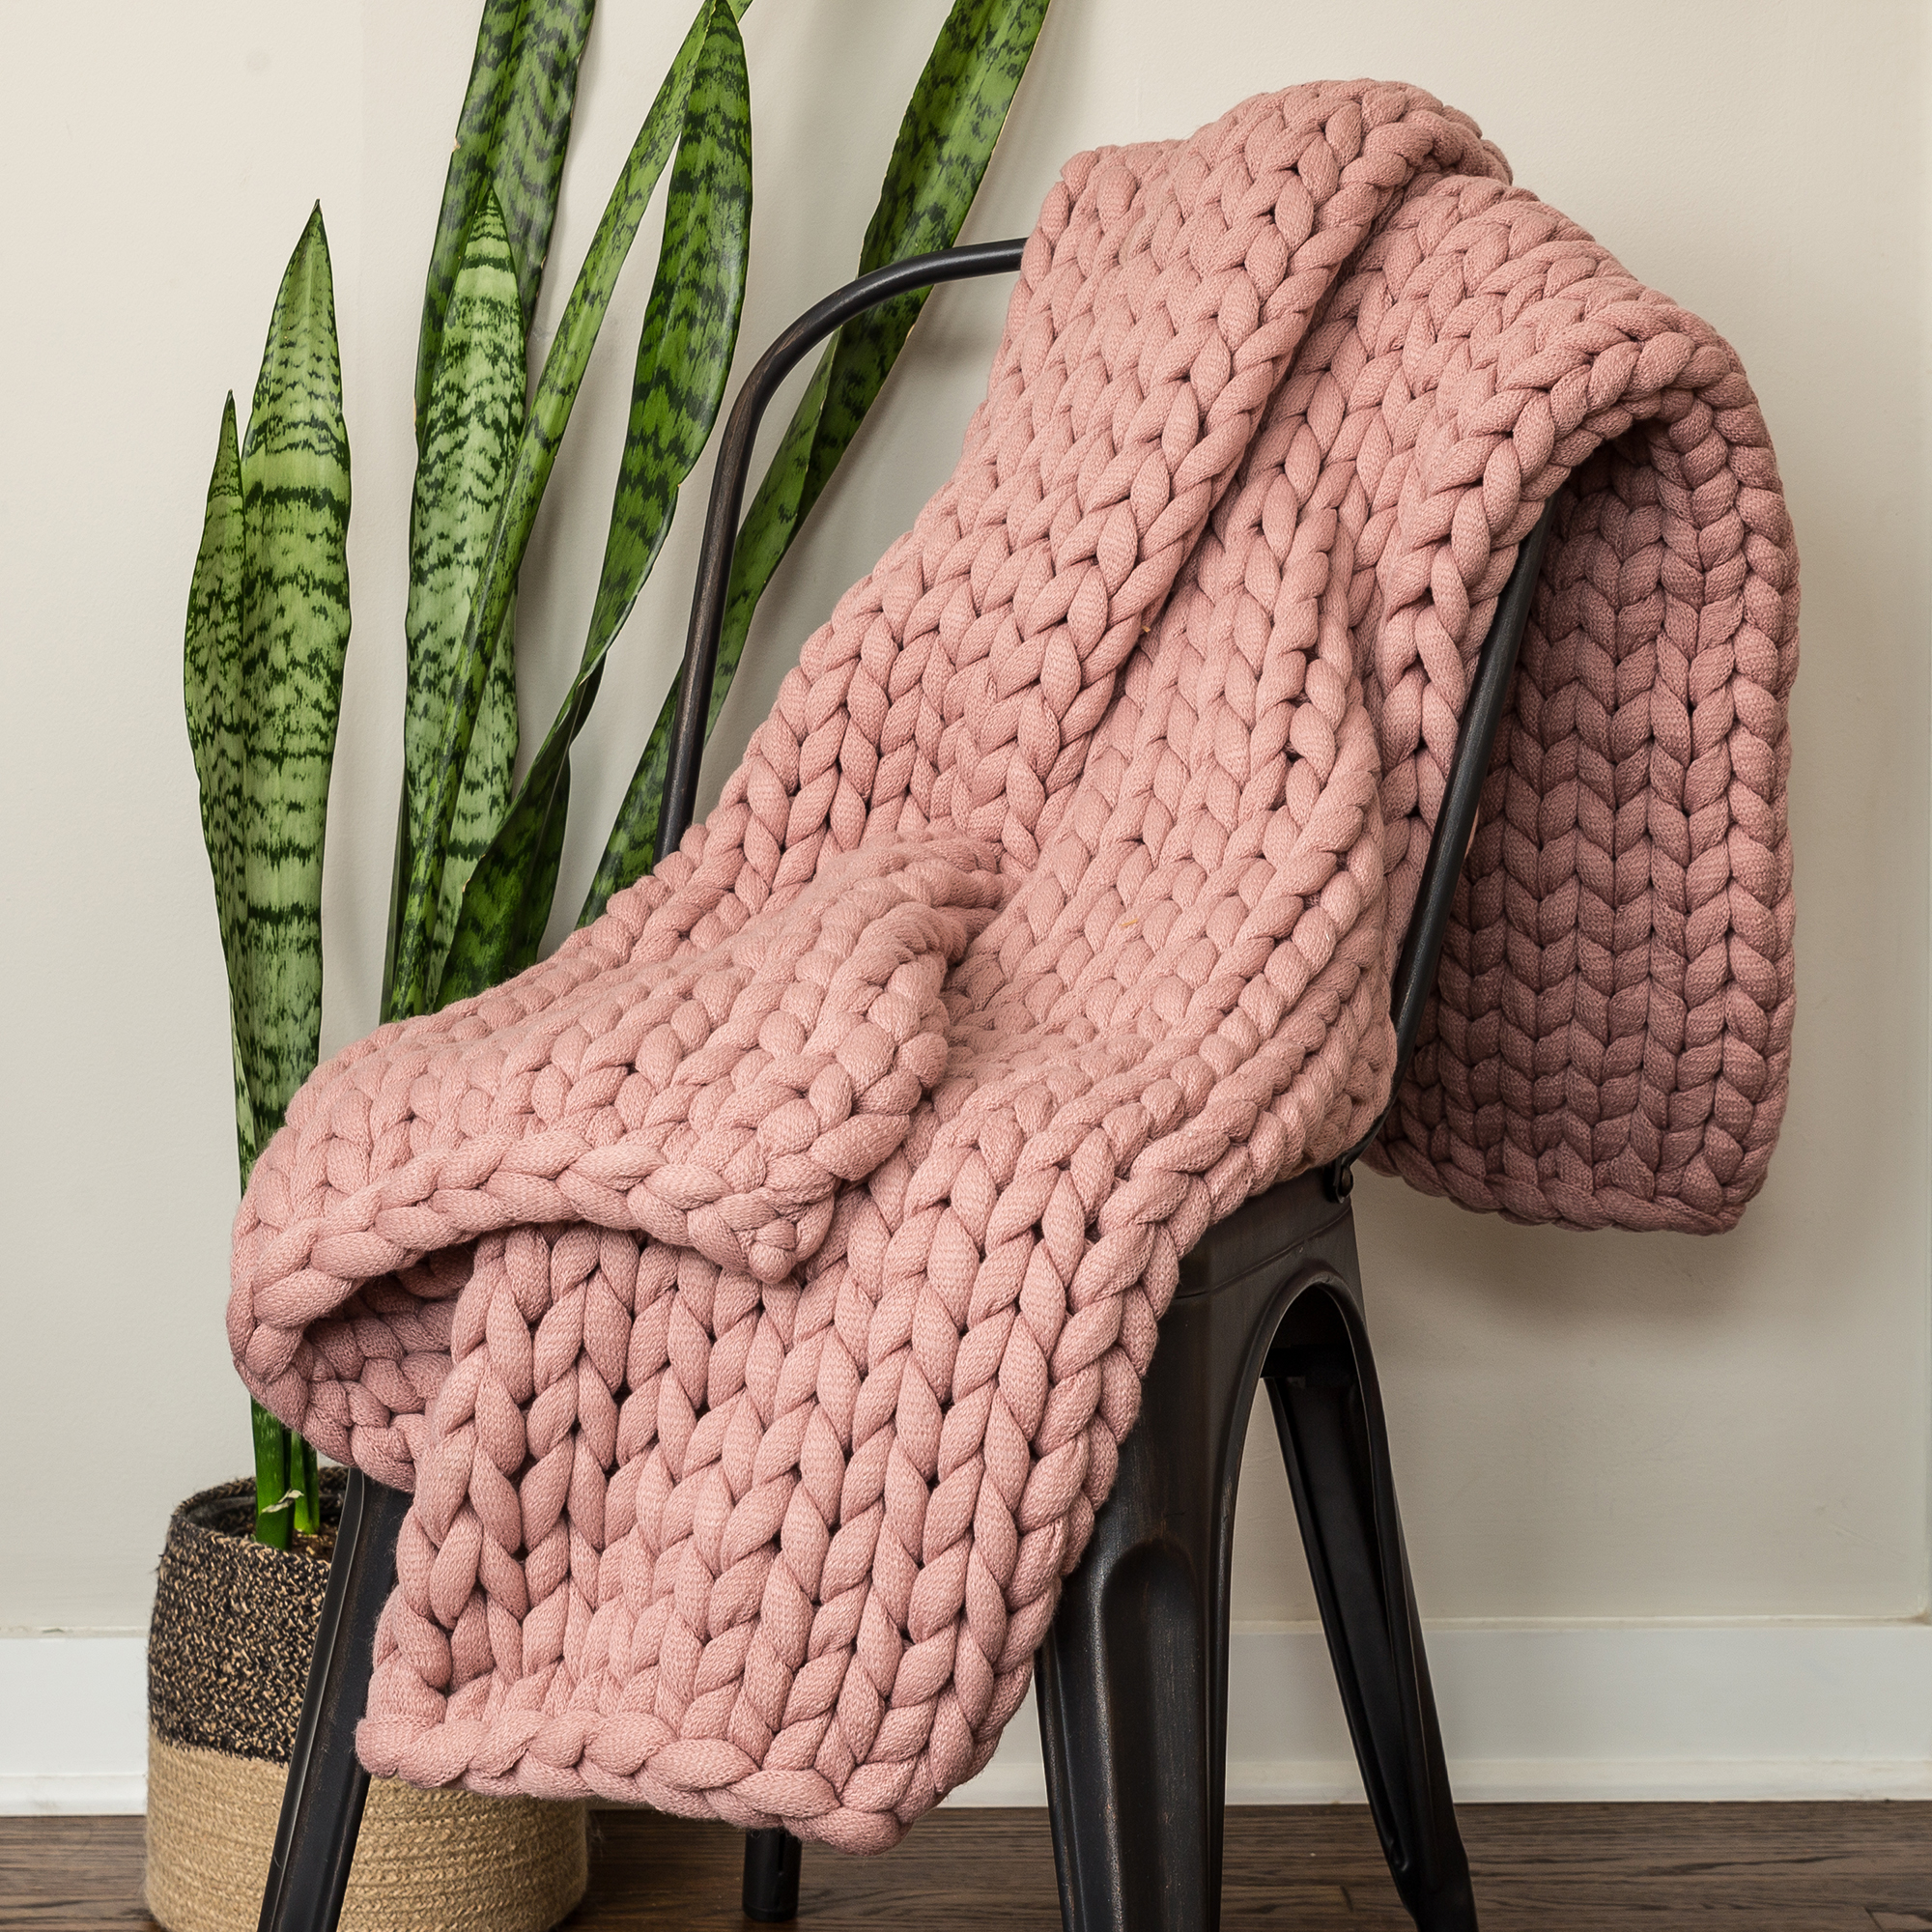 Chunky Knit Throws by Donna Sharp - Luxurious Acrylic Blankets for Cozy  Home Decor